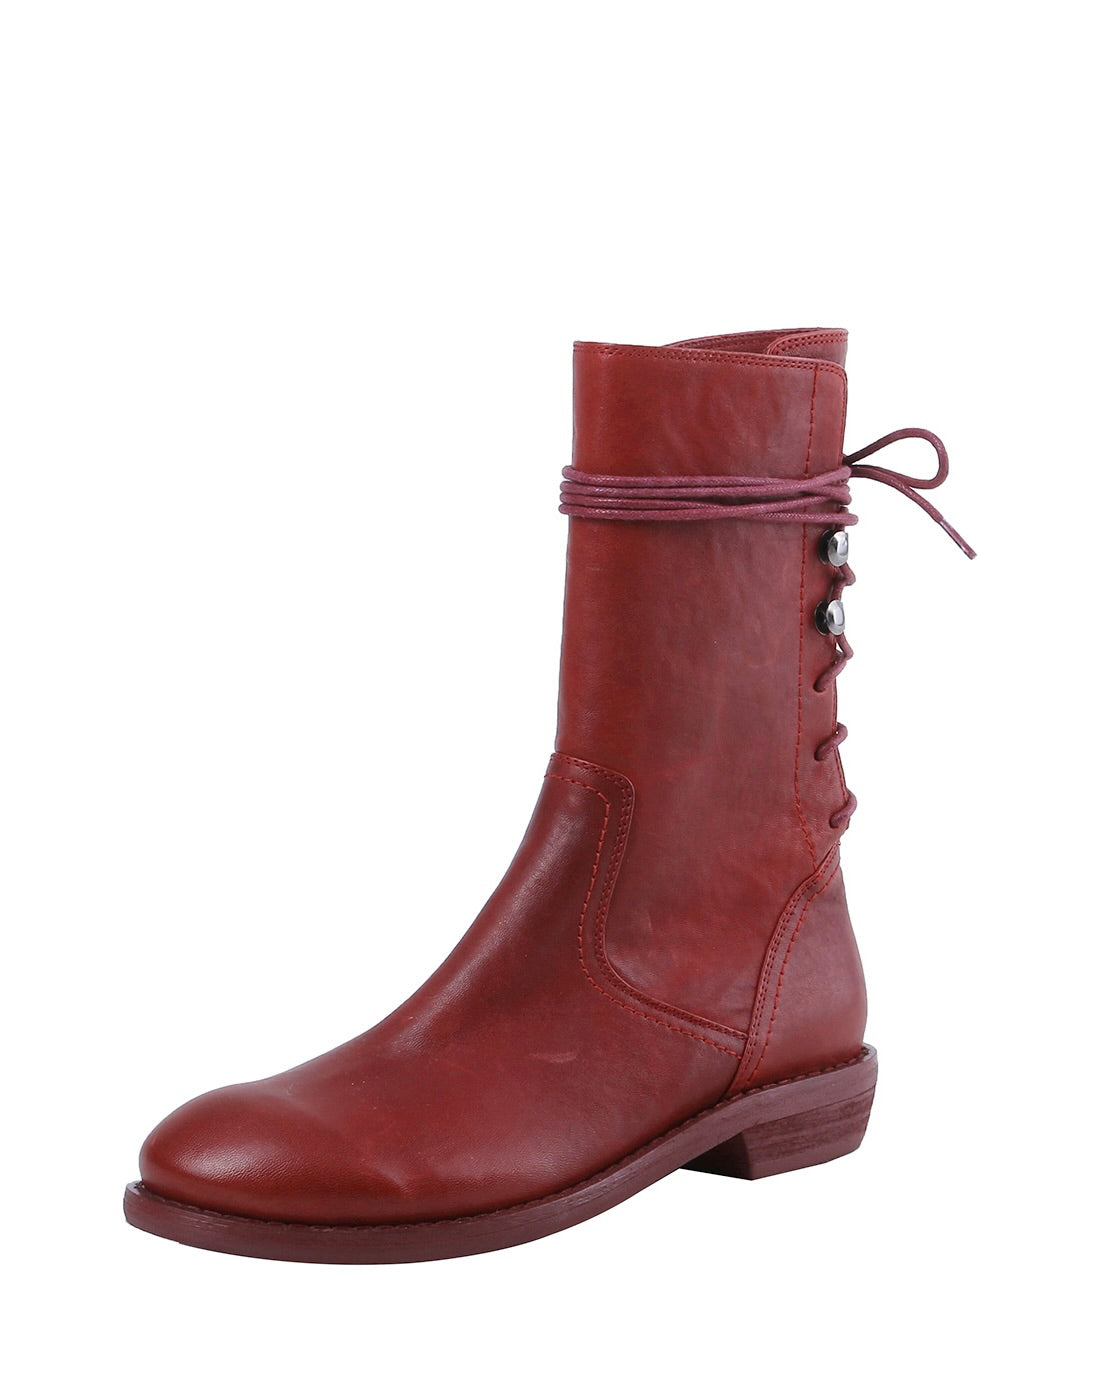 730-horsehide-boots-red